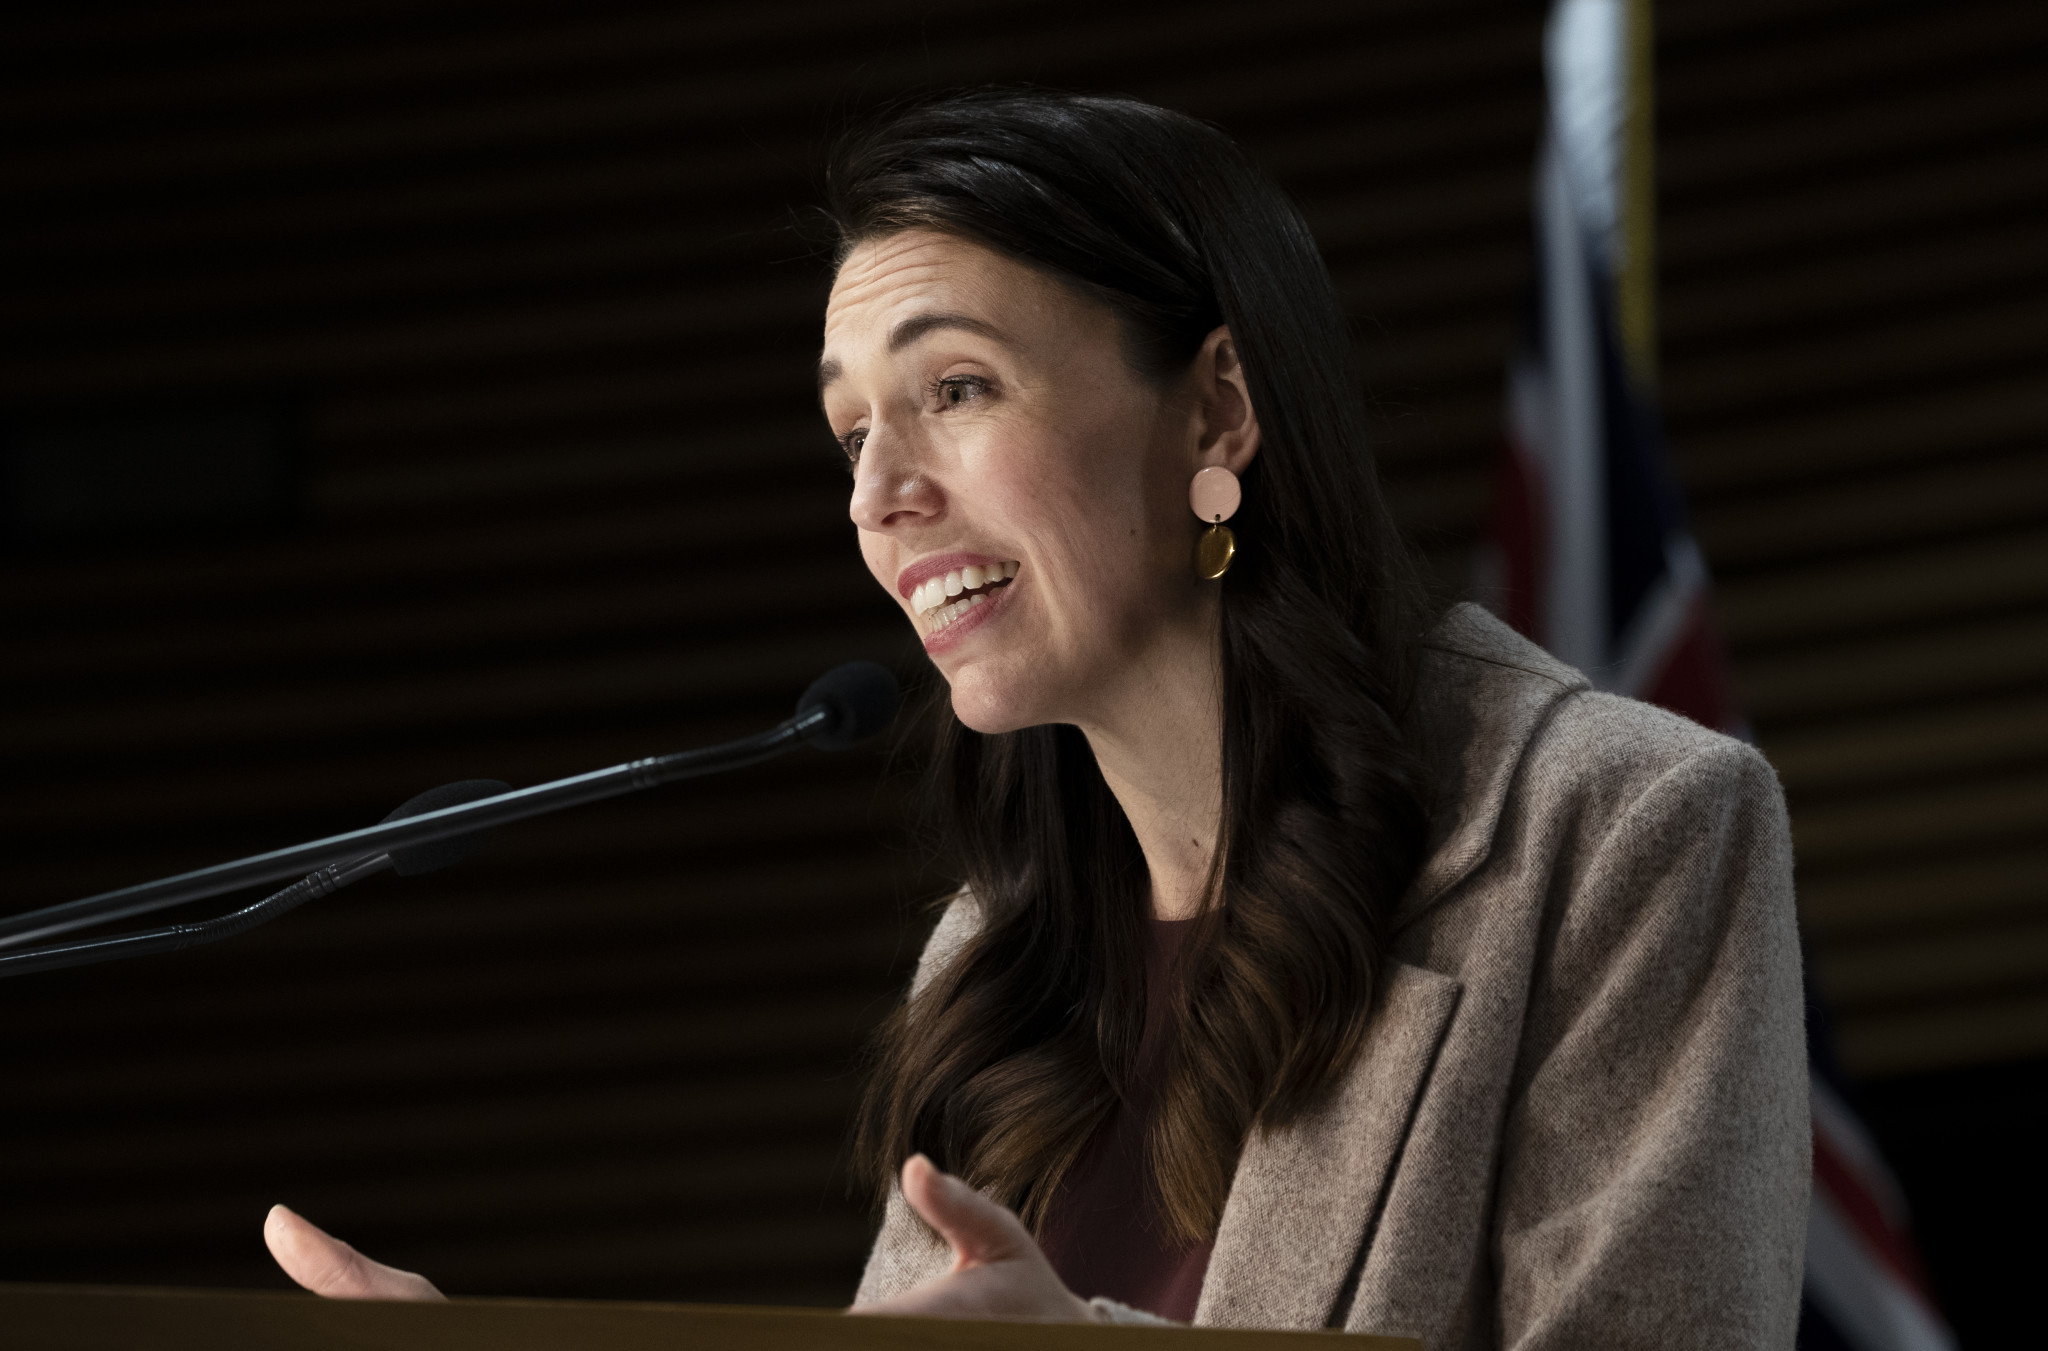 New Zealand, led by Prime Minister Jacinda Ardern, has pursued a strict approach to international travel as part of its COVID-19 elimination strategy ©Getty Images